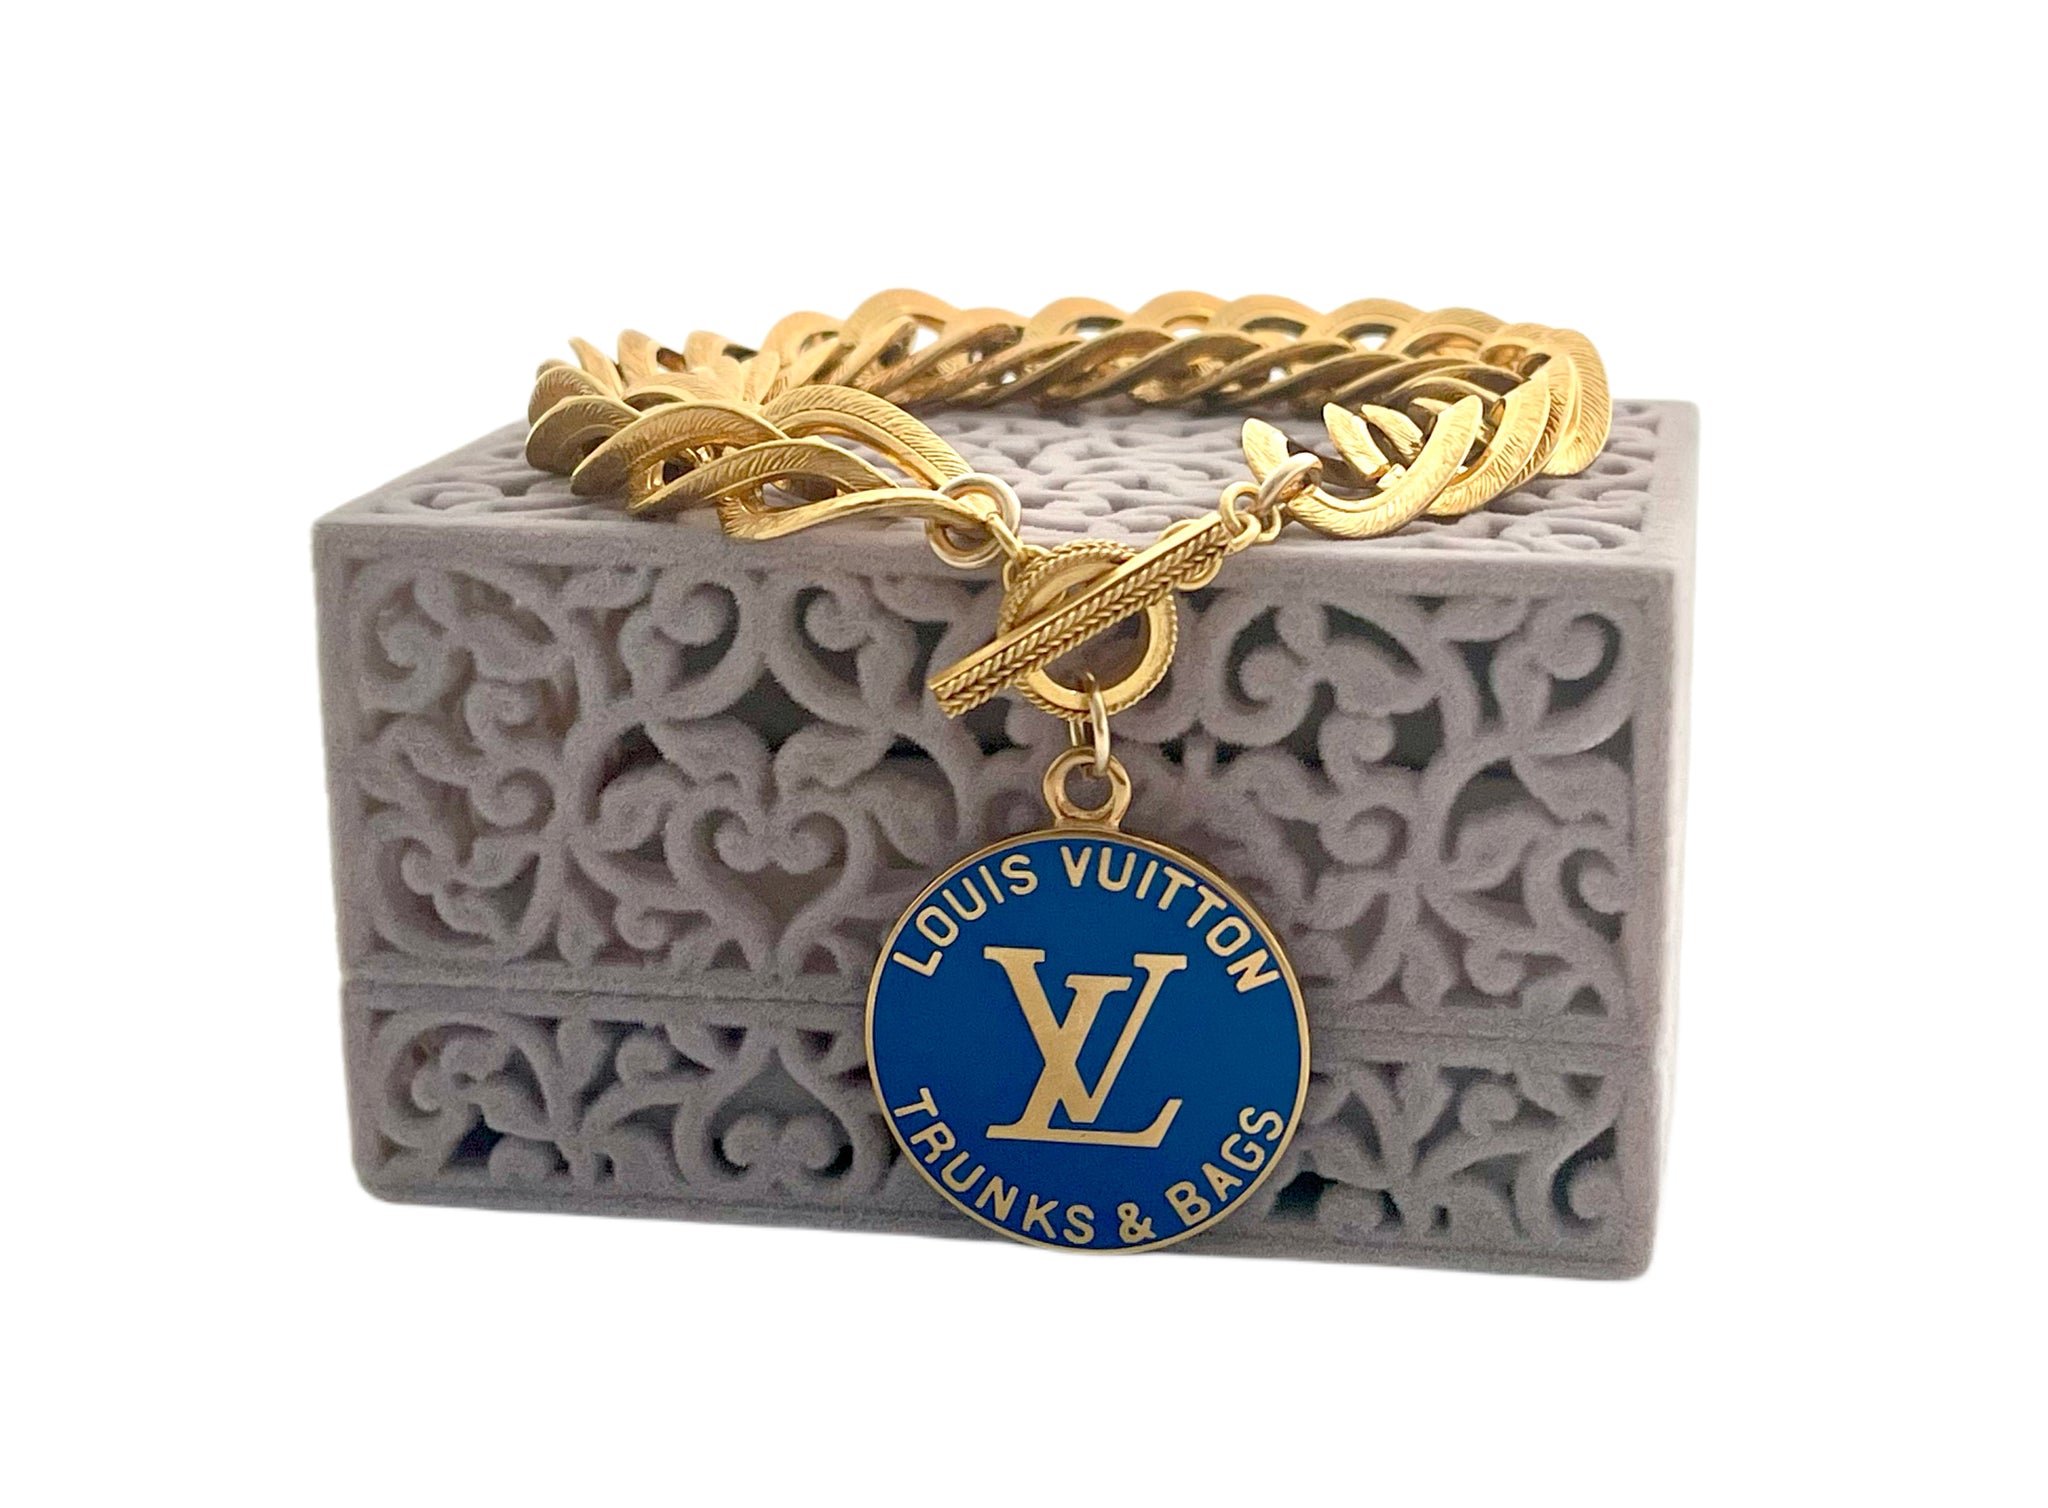 Louis Vuitton - Authenticated Bracelet - Gold Plated Gold for Women, Very Good Condition